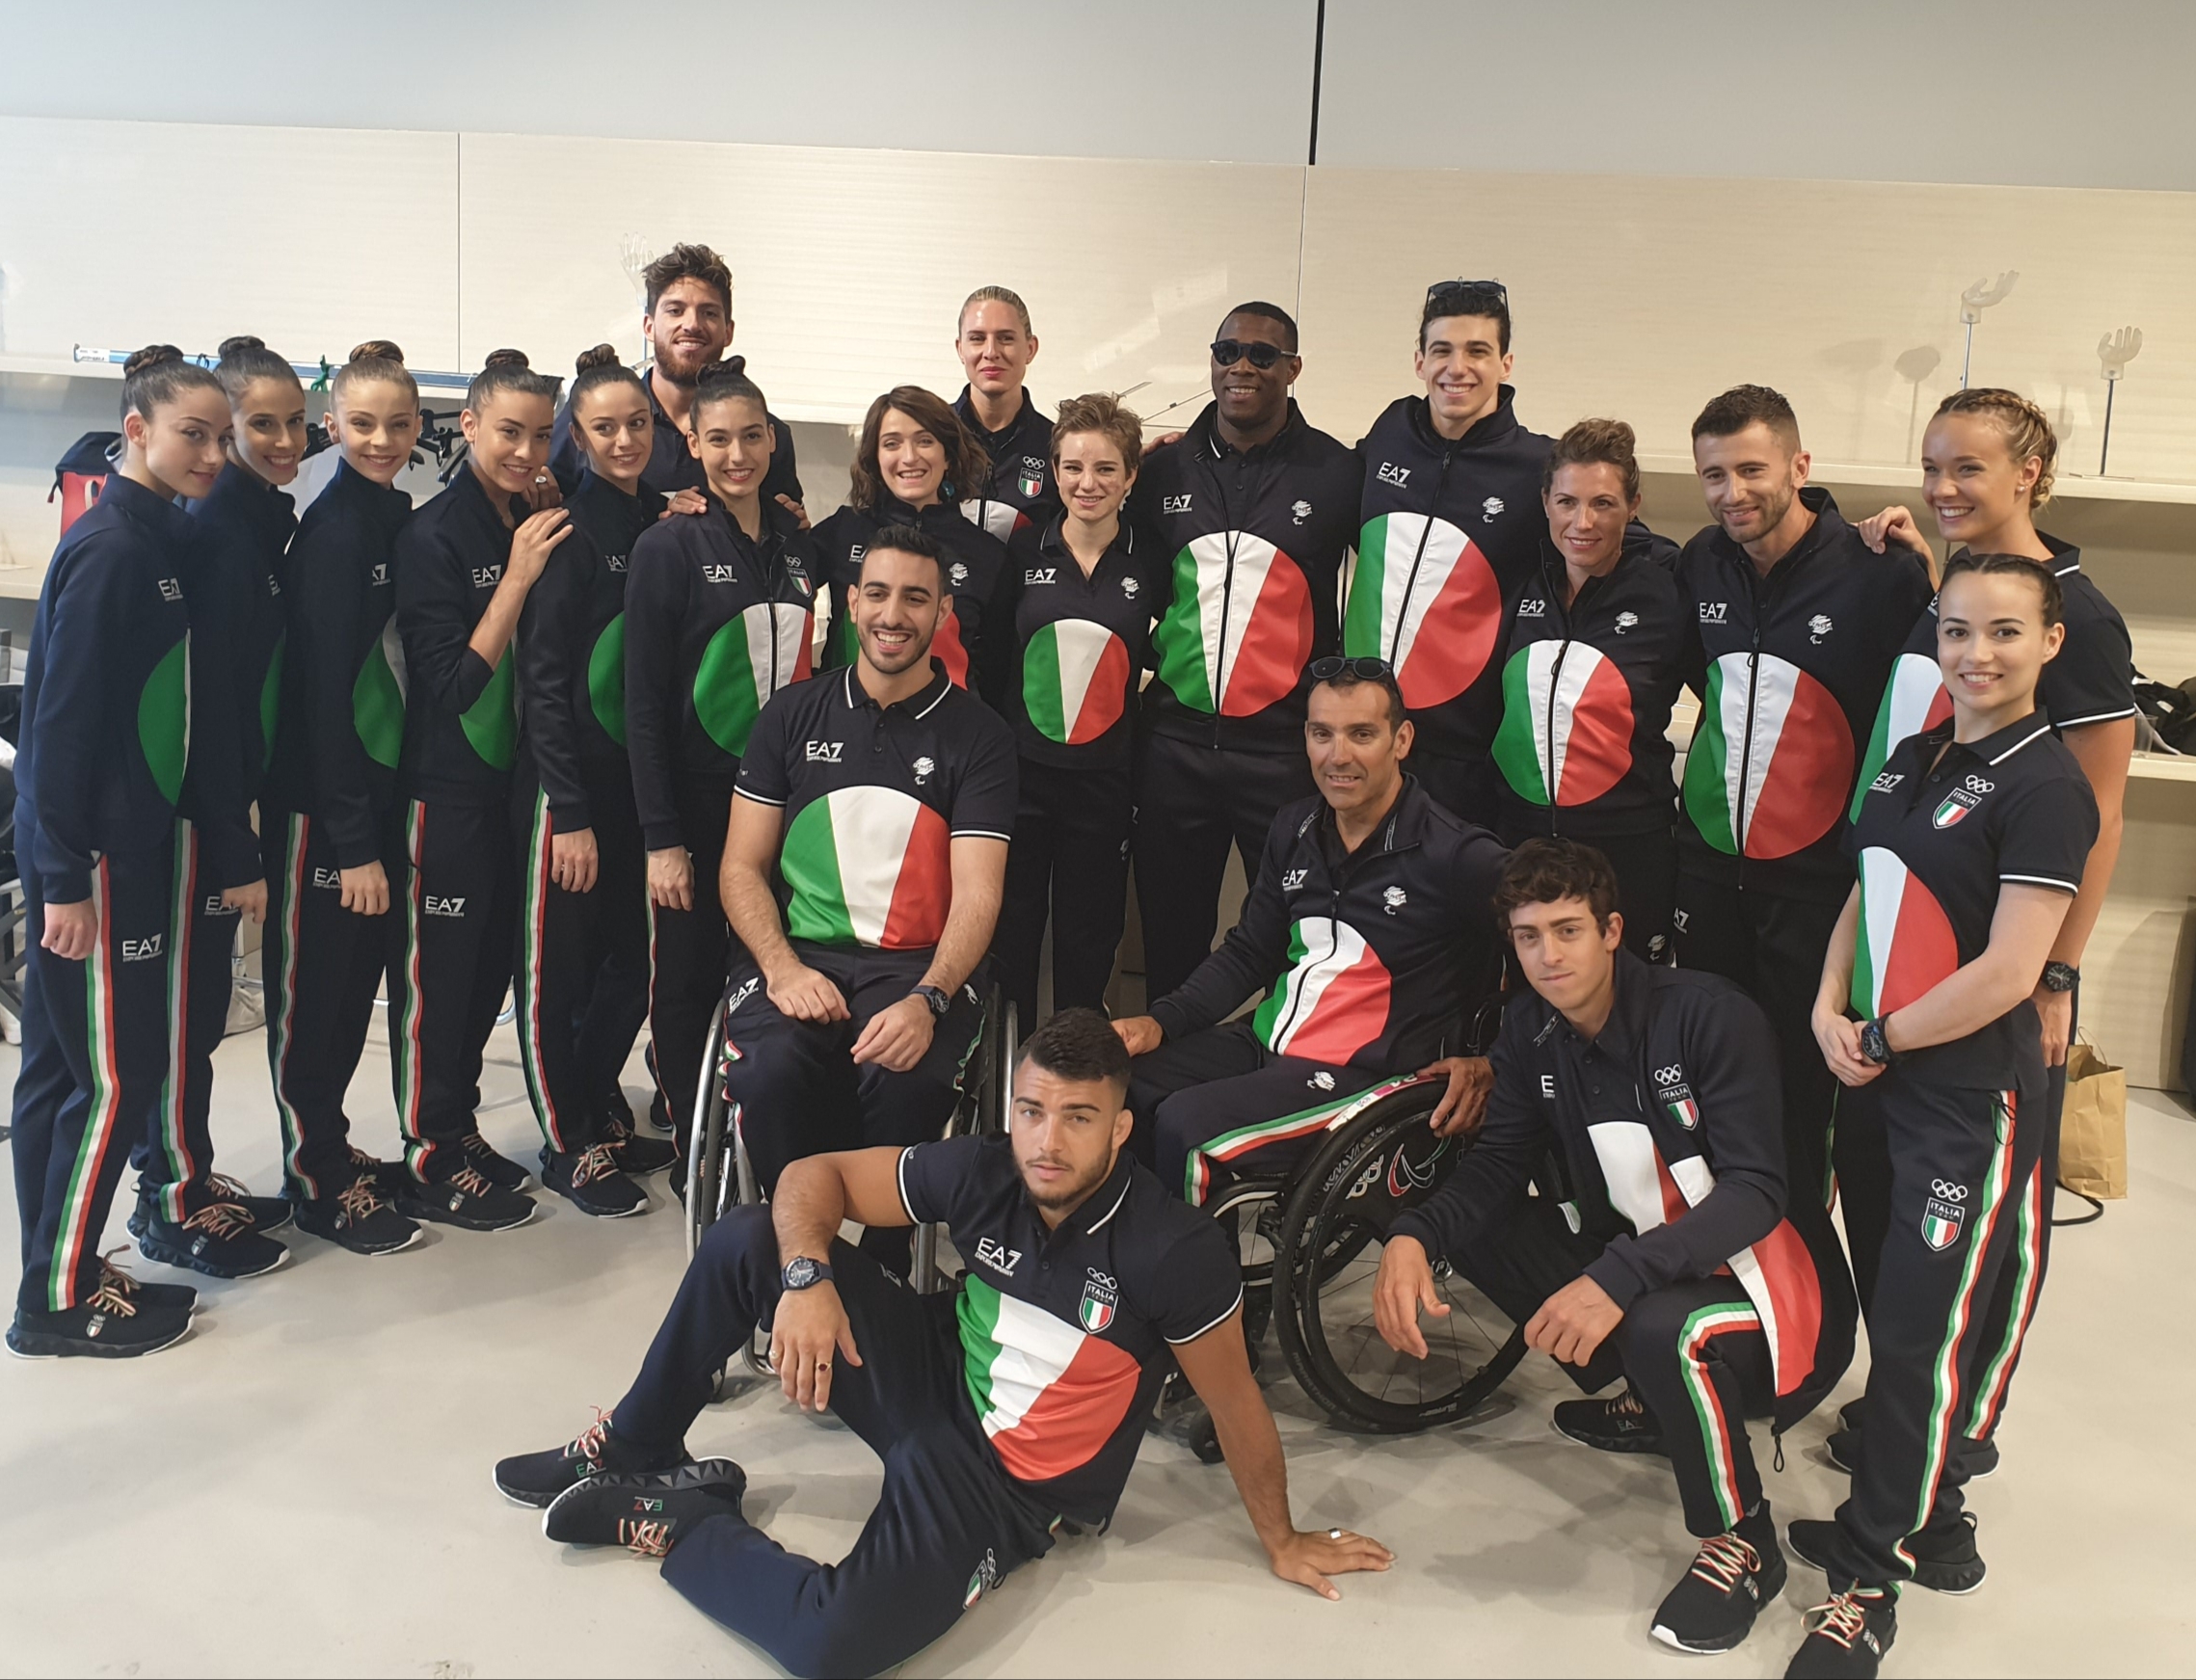 Giorgio Armani dresses the Italian Team at Olympic and Paralympic Games